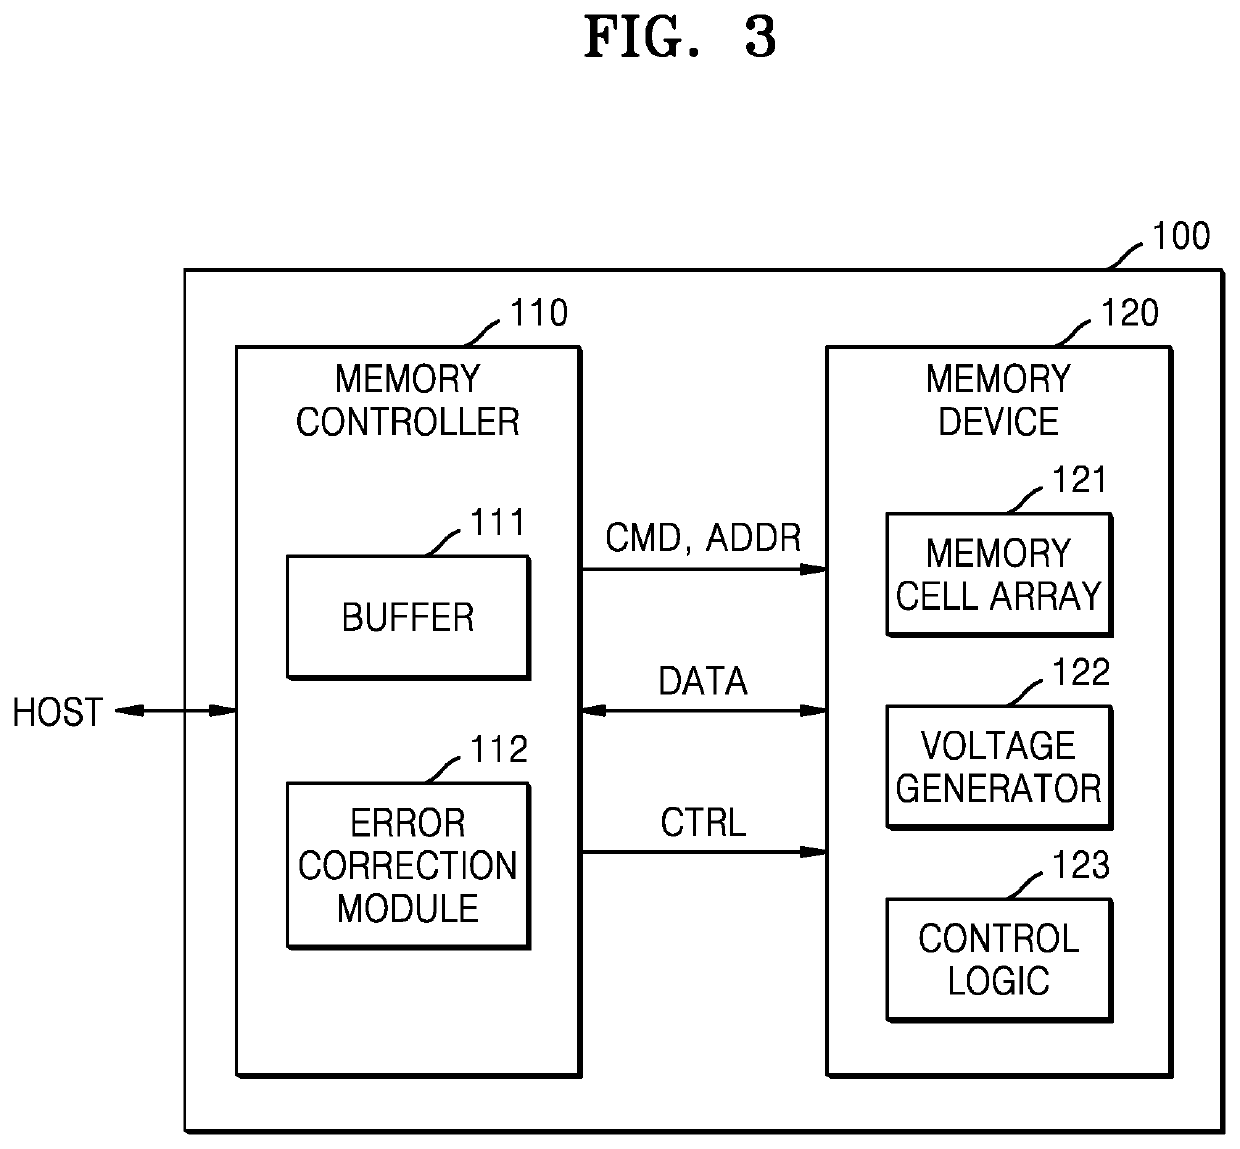 Operating method of memory system and host recovering data with write error